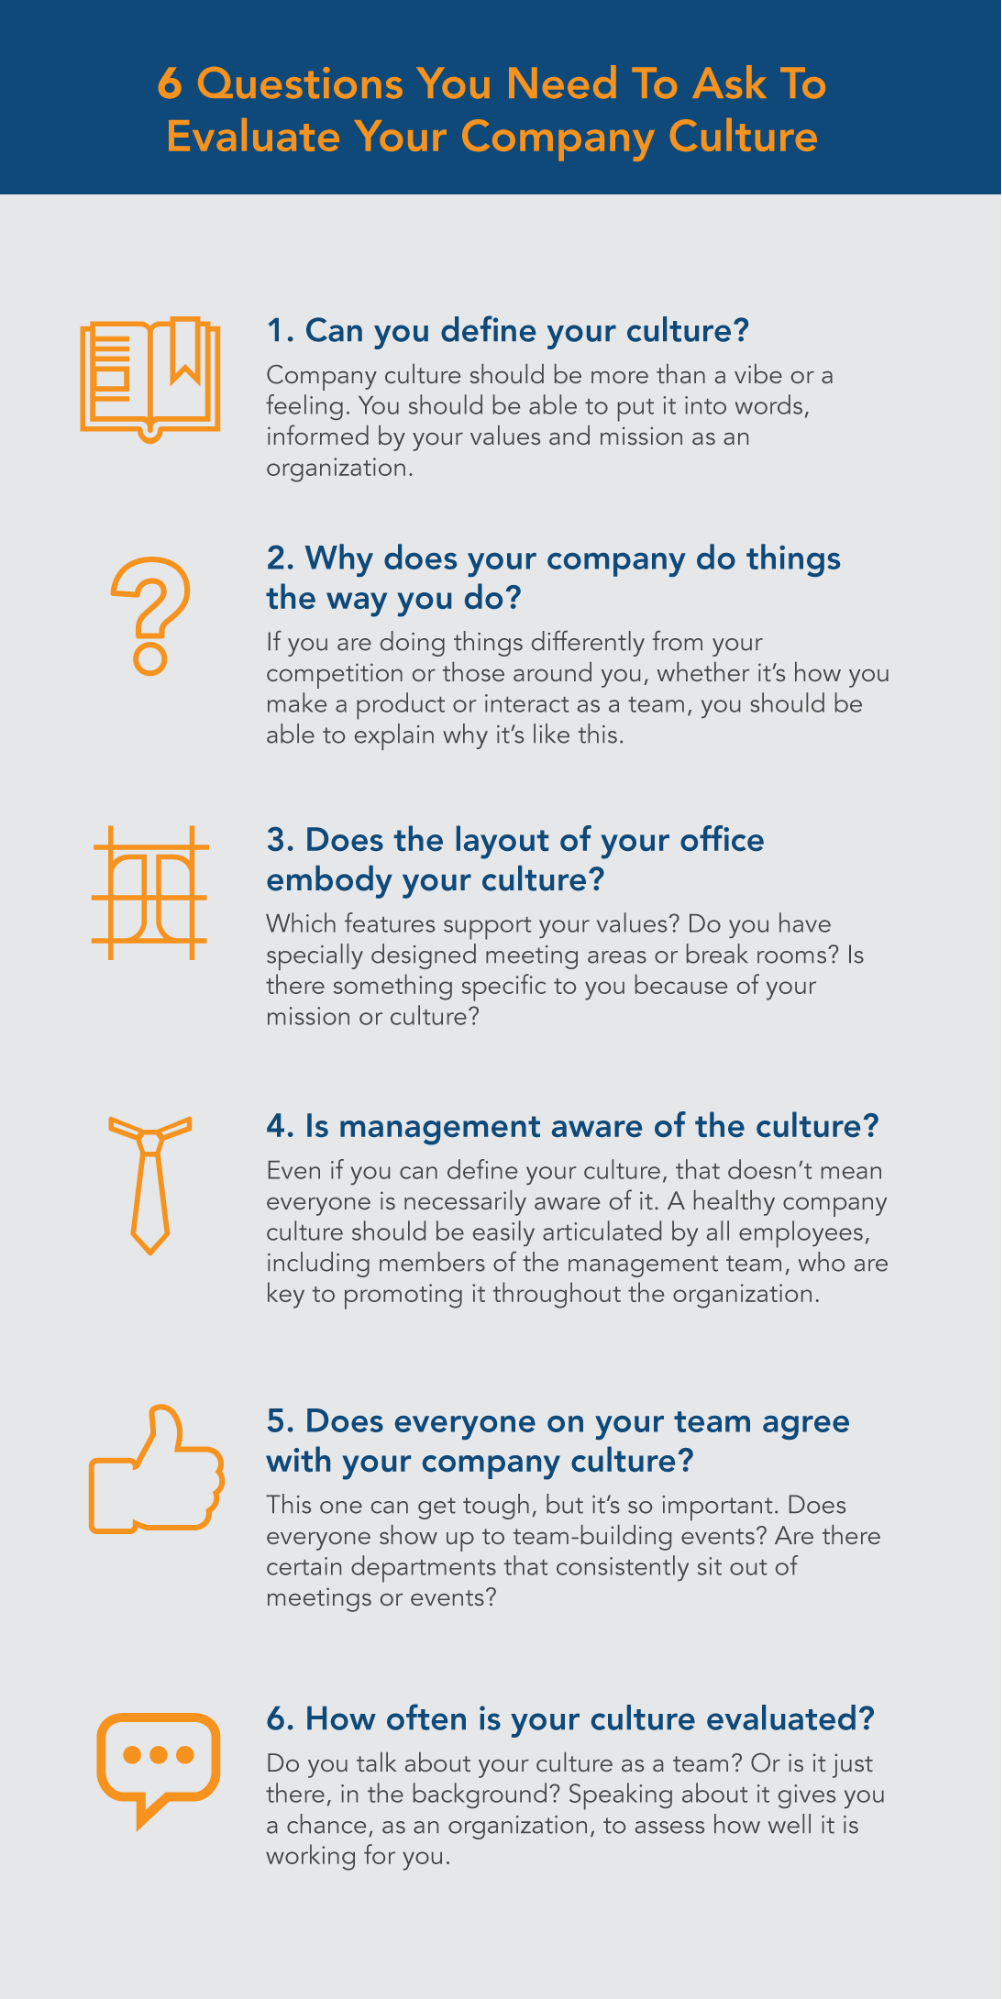 6 Questions You Need To Ask To Evaluate Your Company Culture